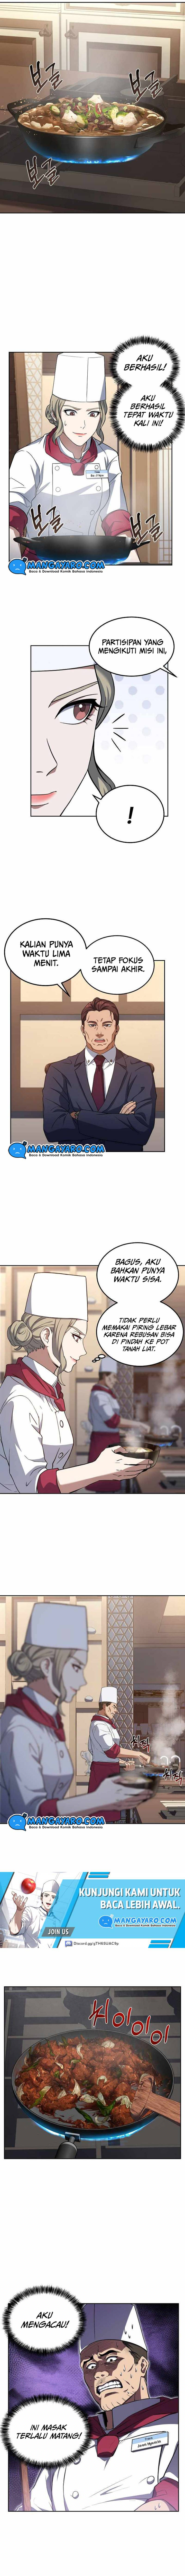 Youngest Chef From the 3rd Rate Hotel Chapter 32